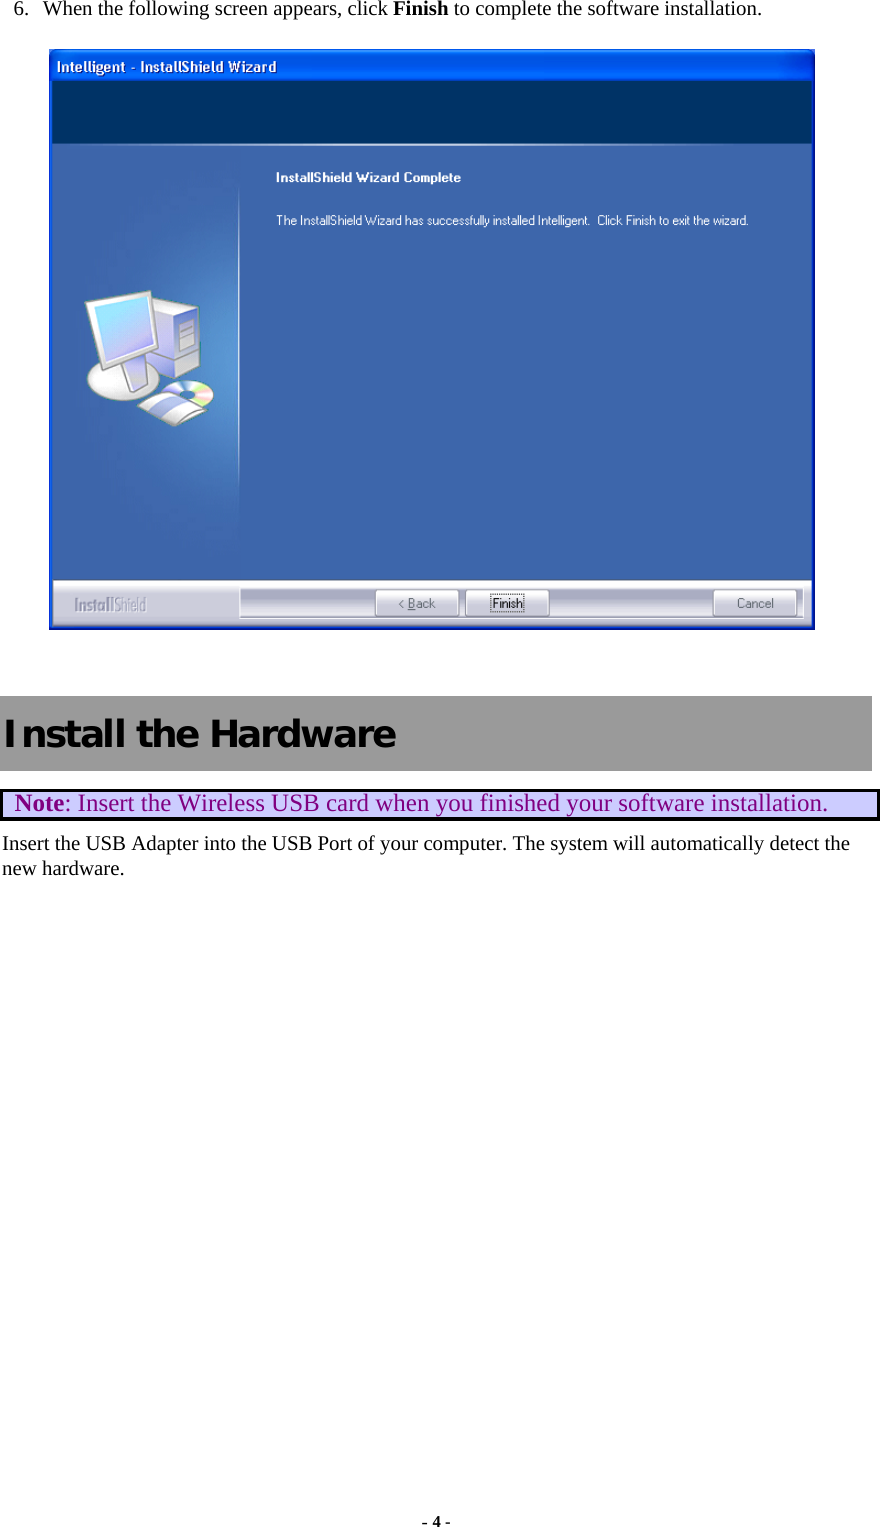   6. When the following screen appears, click Finish to complete the software installation.   Install the Hardware Note: Insert the Wireless USB card when you finished your software installation. Insert the USB Adapter into the USB Port of your computer. The system will automatically detect the new hardware. - 4 - 